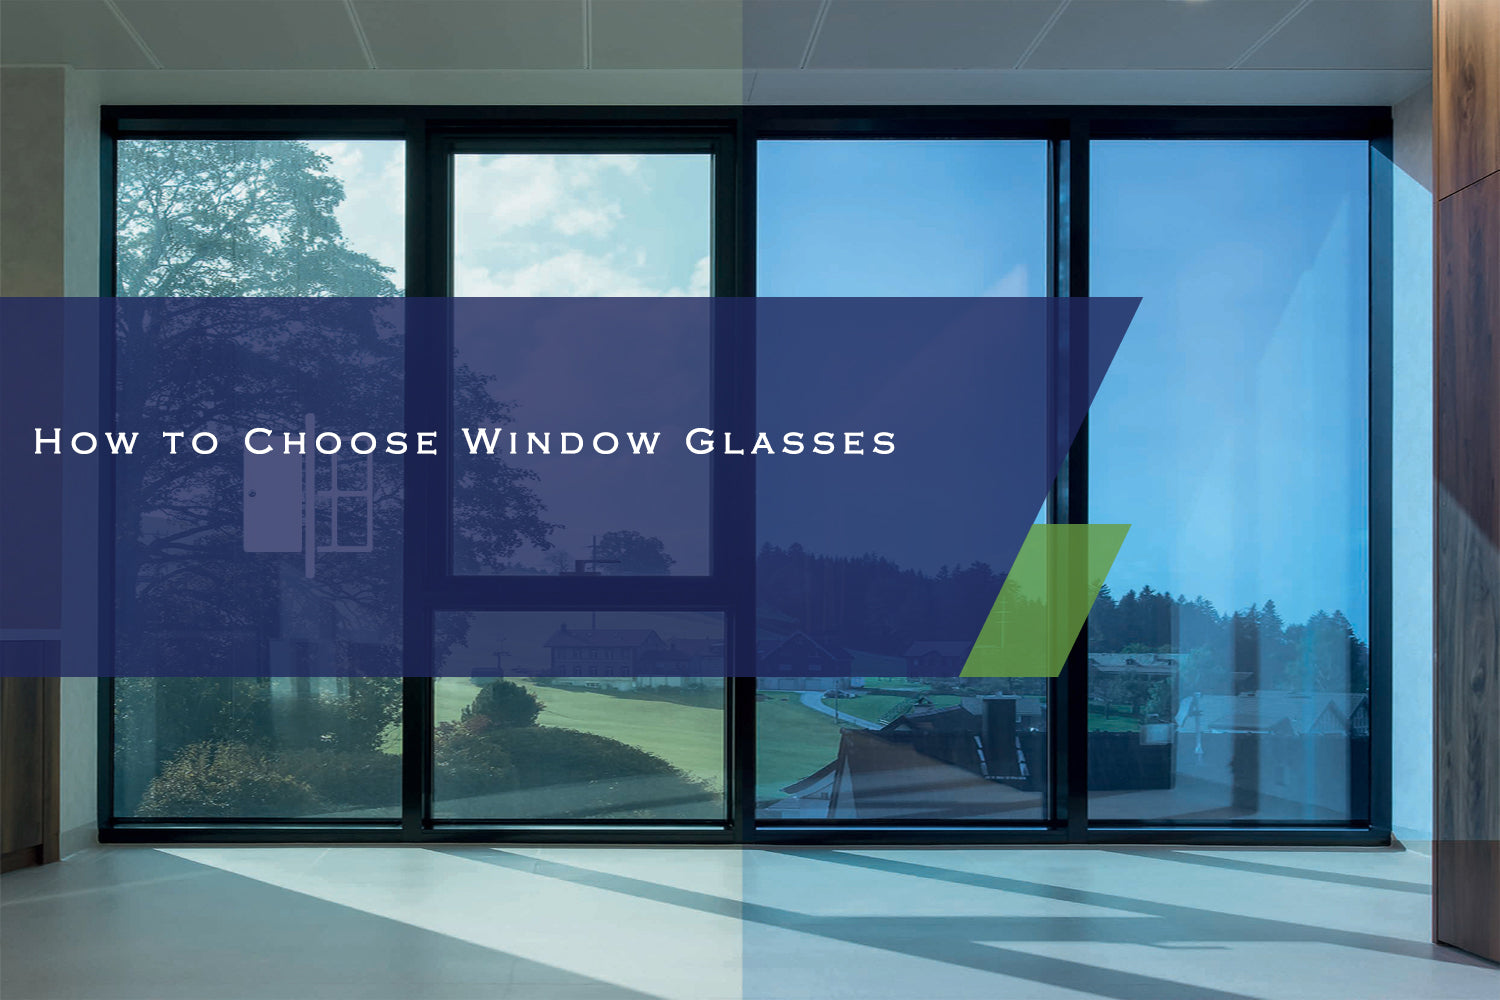 How to Choose Window Glasses